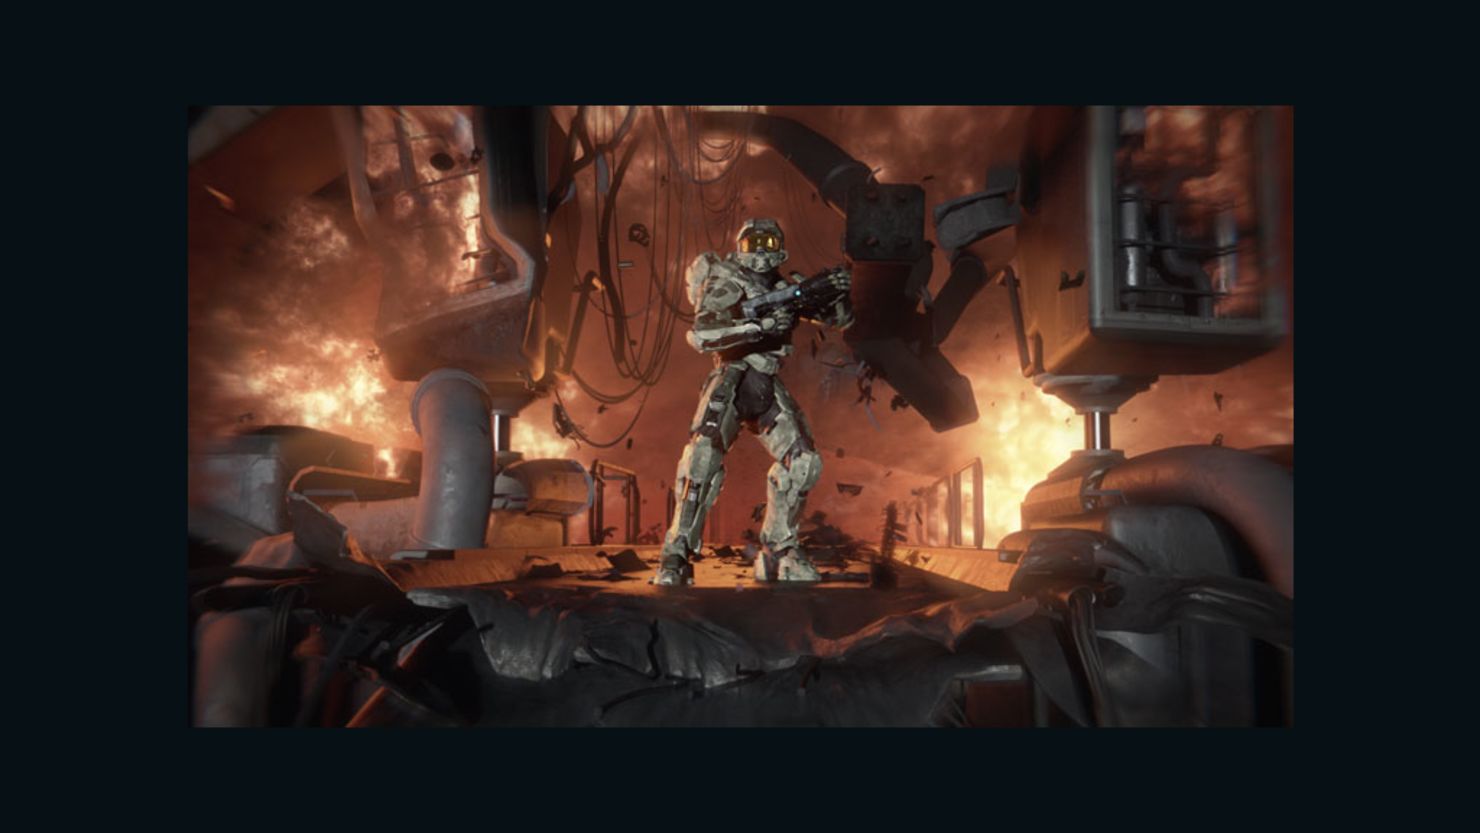 "Halo 4" will be next blockbuster installment in the iconic franchise that has helped defined a generation of gaming.